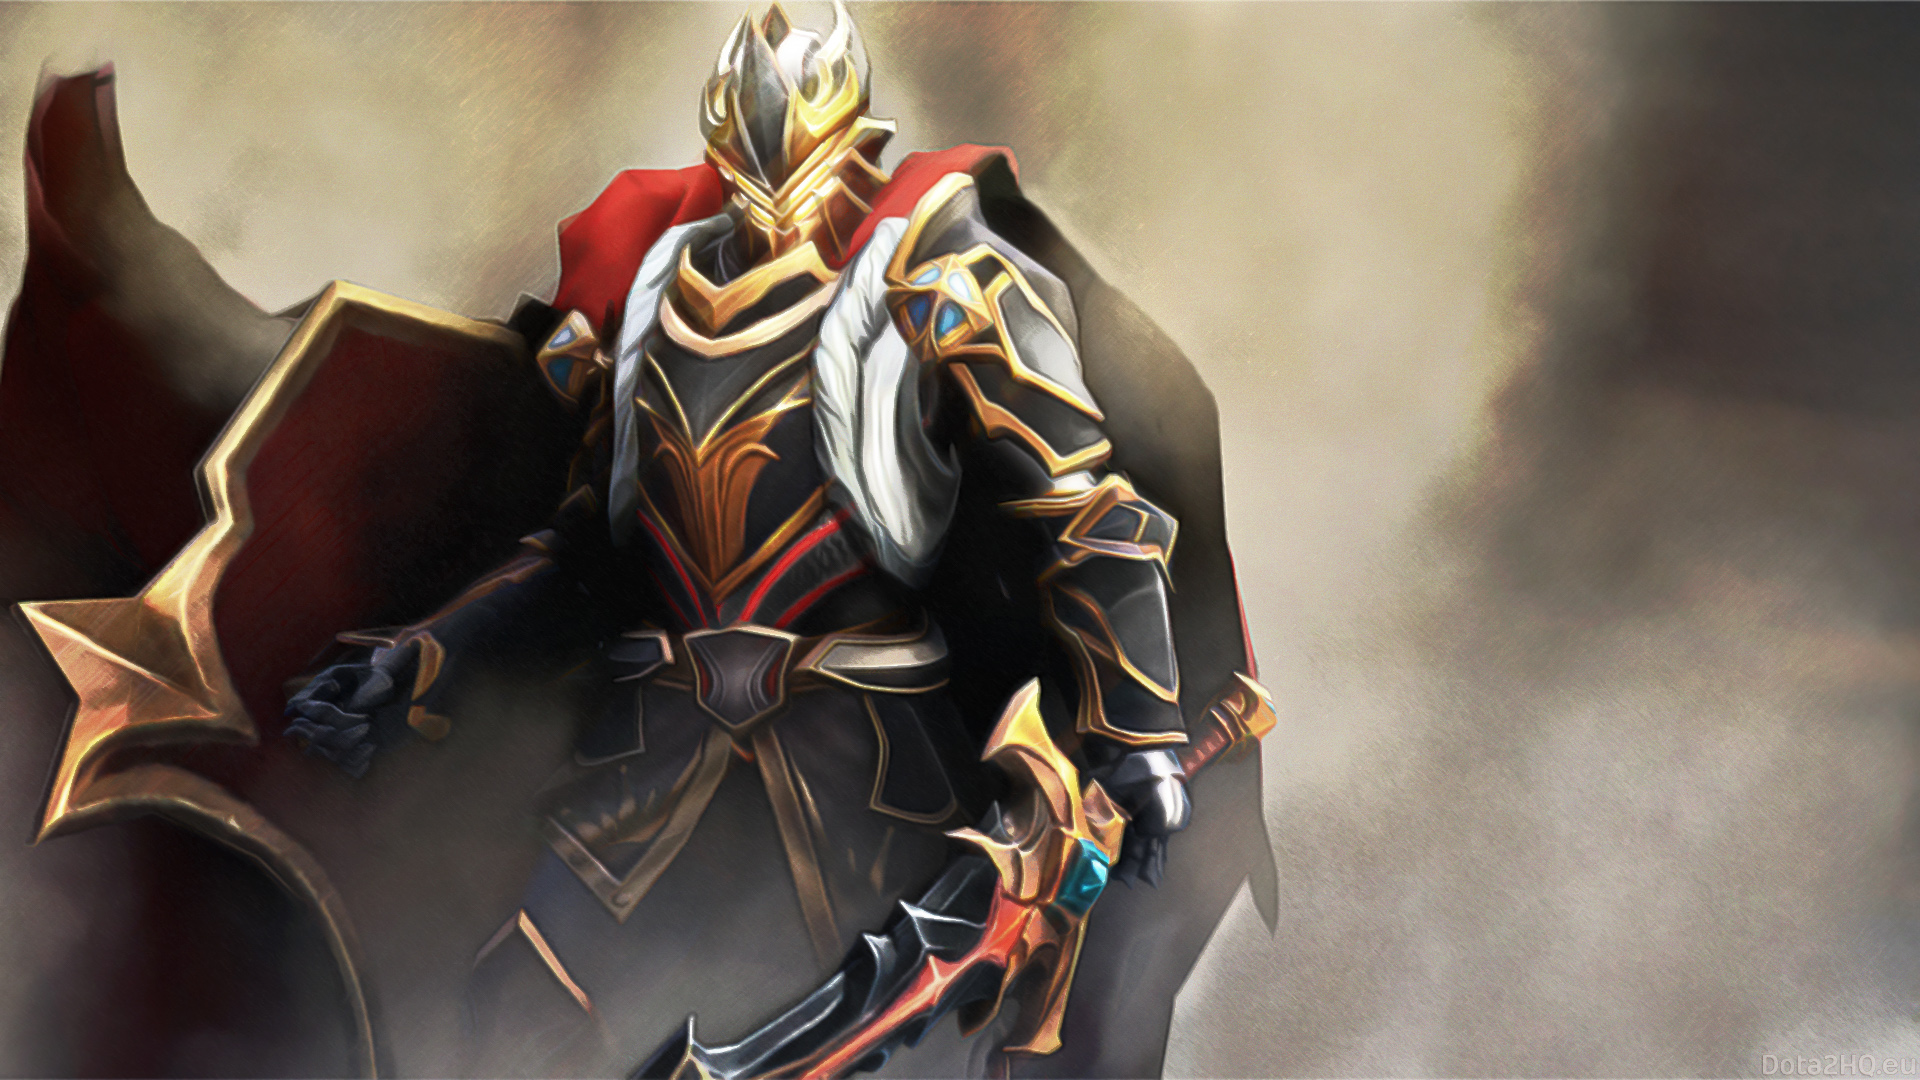 dragon knight wallpaper,cg artwork,action figure,pc game,fictional character,illustration